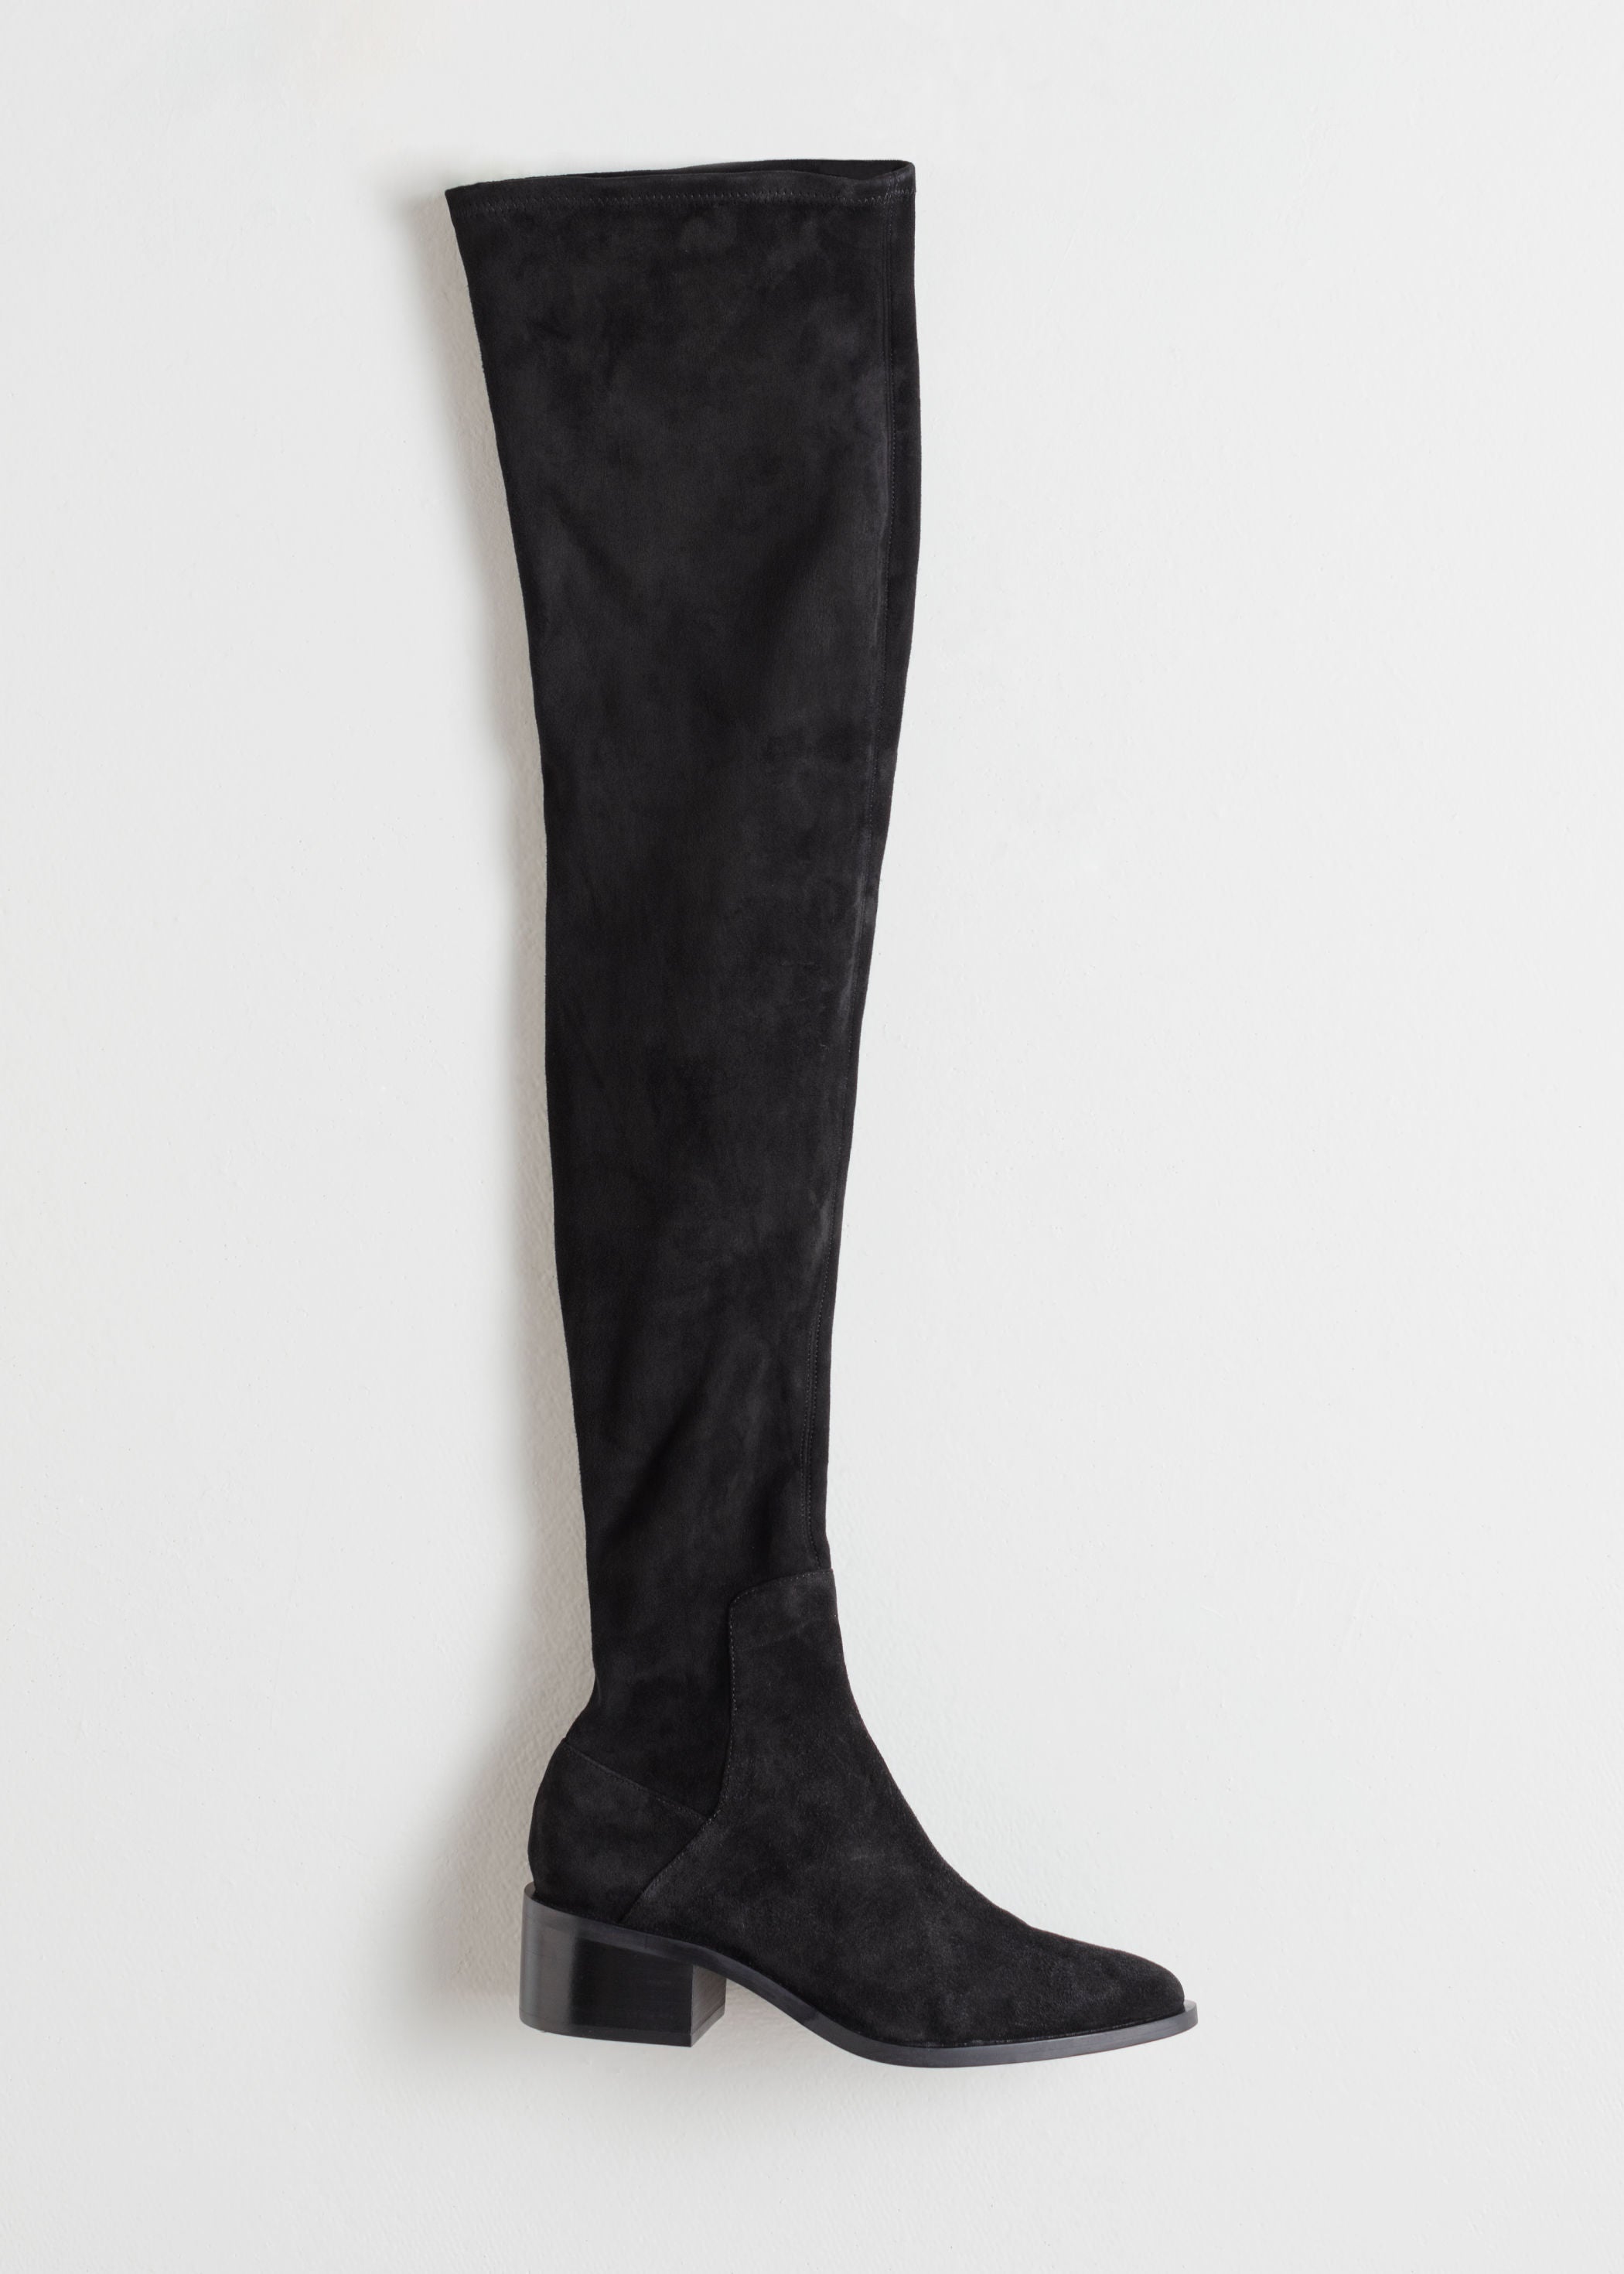 & Other Stories + Suede Thigh High Boots